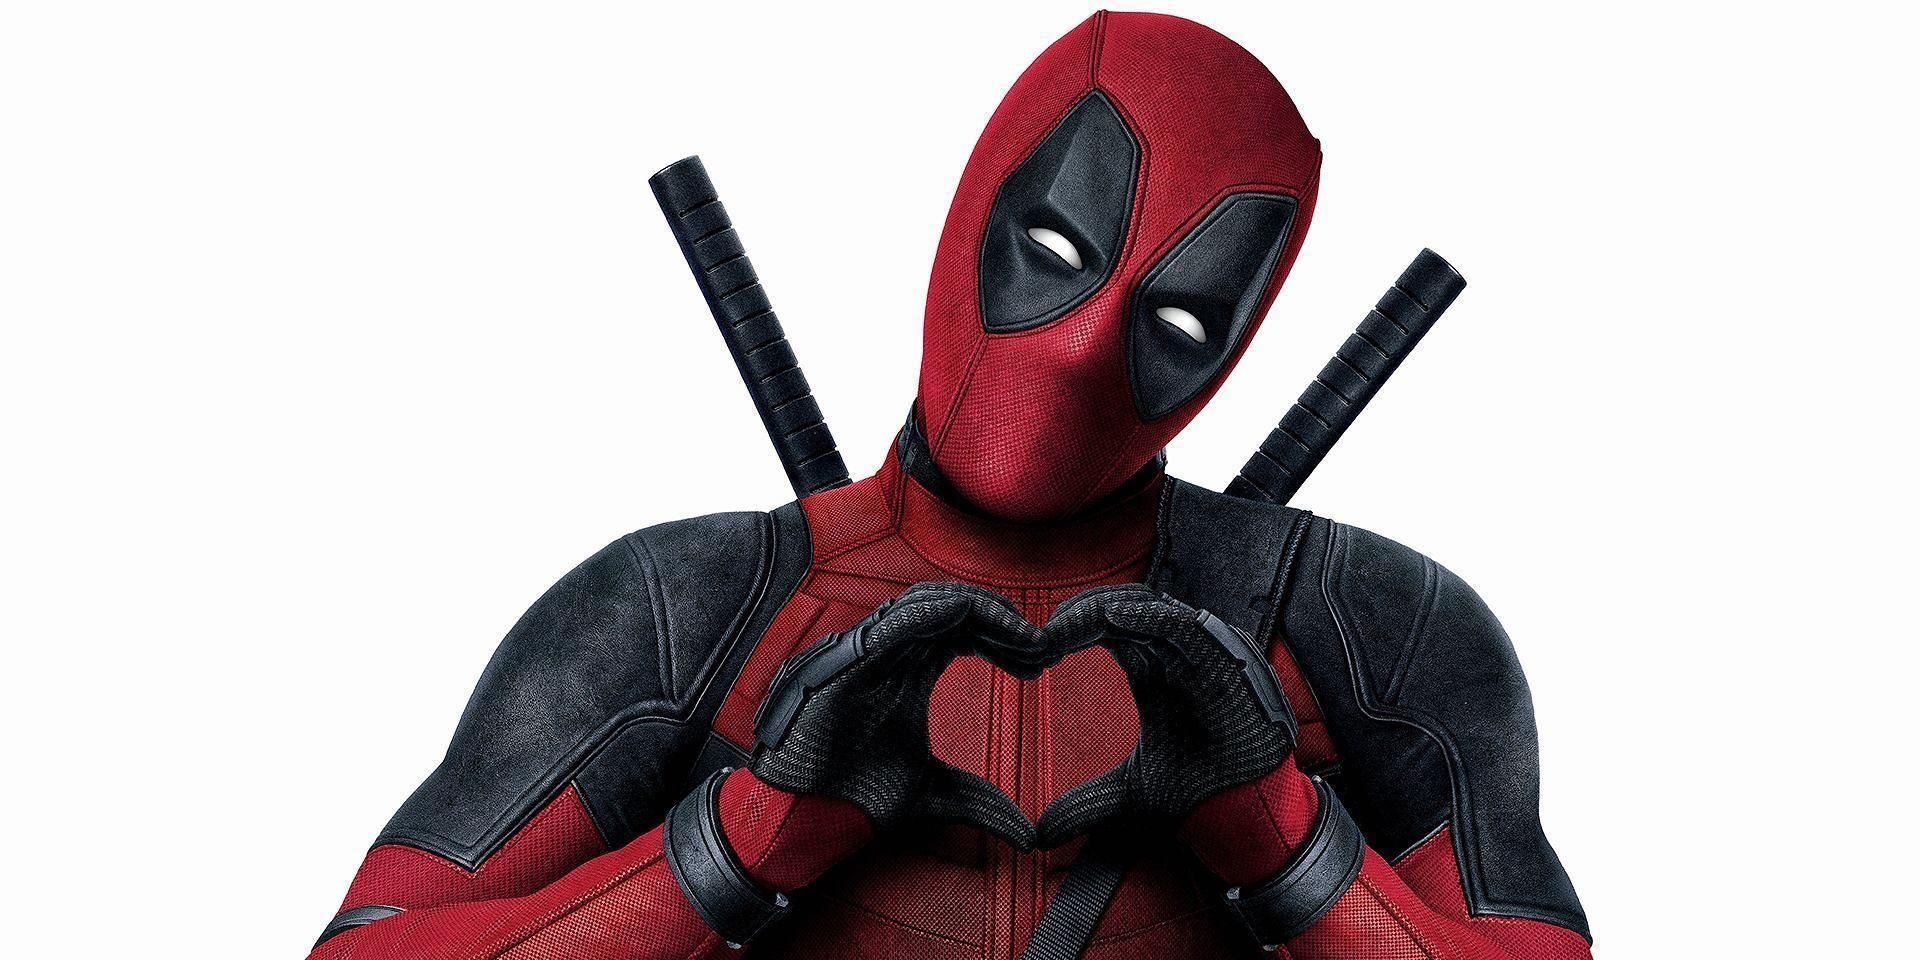 Deadpool making a heart shape with his hands